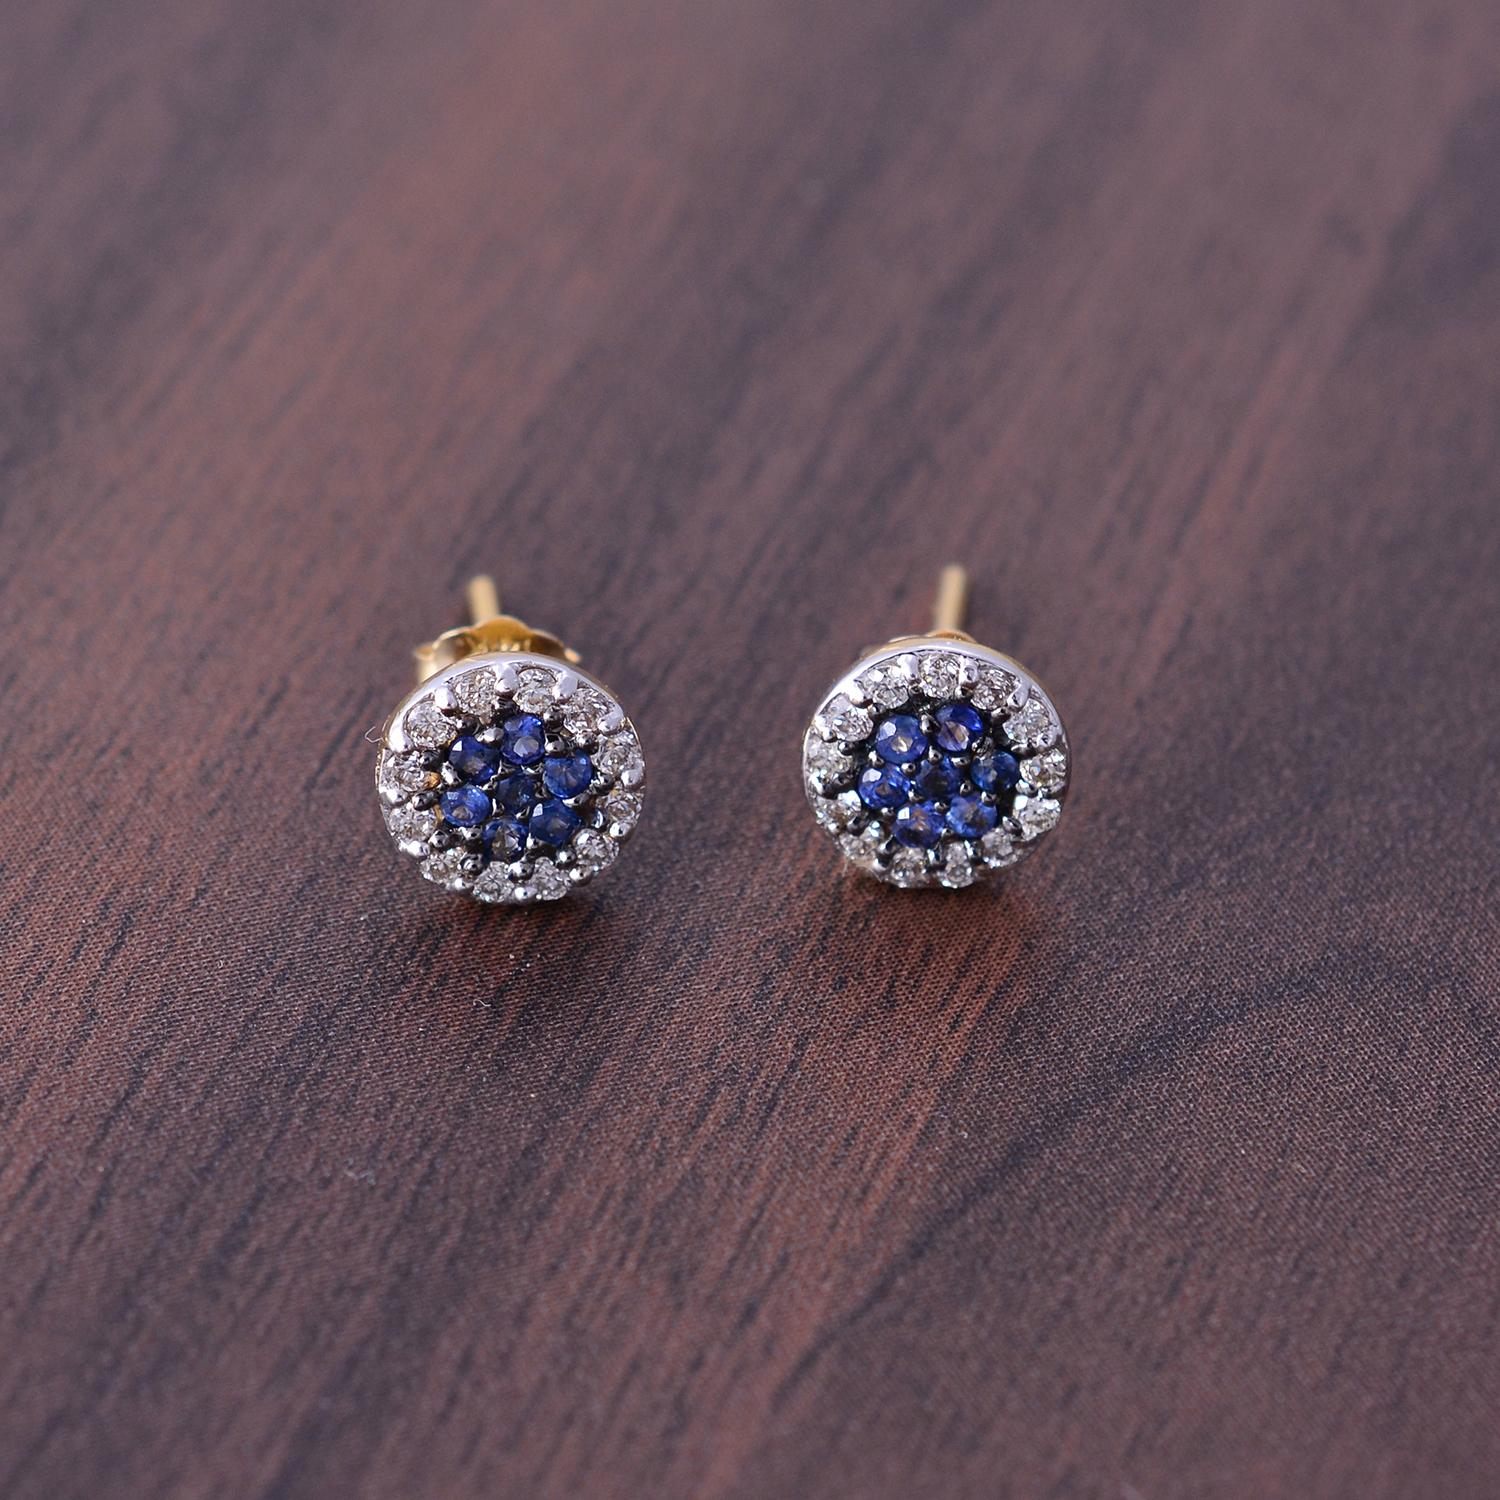 Brilliant Cut Sapphire Stud Earrings with Diamond in 14k Gold For Sale